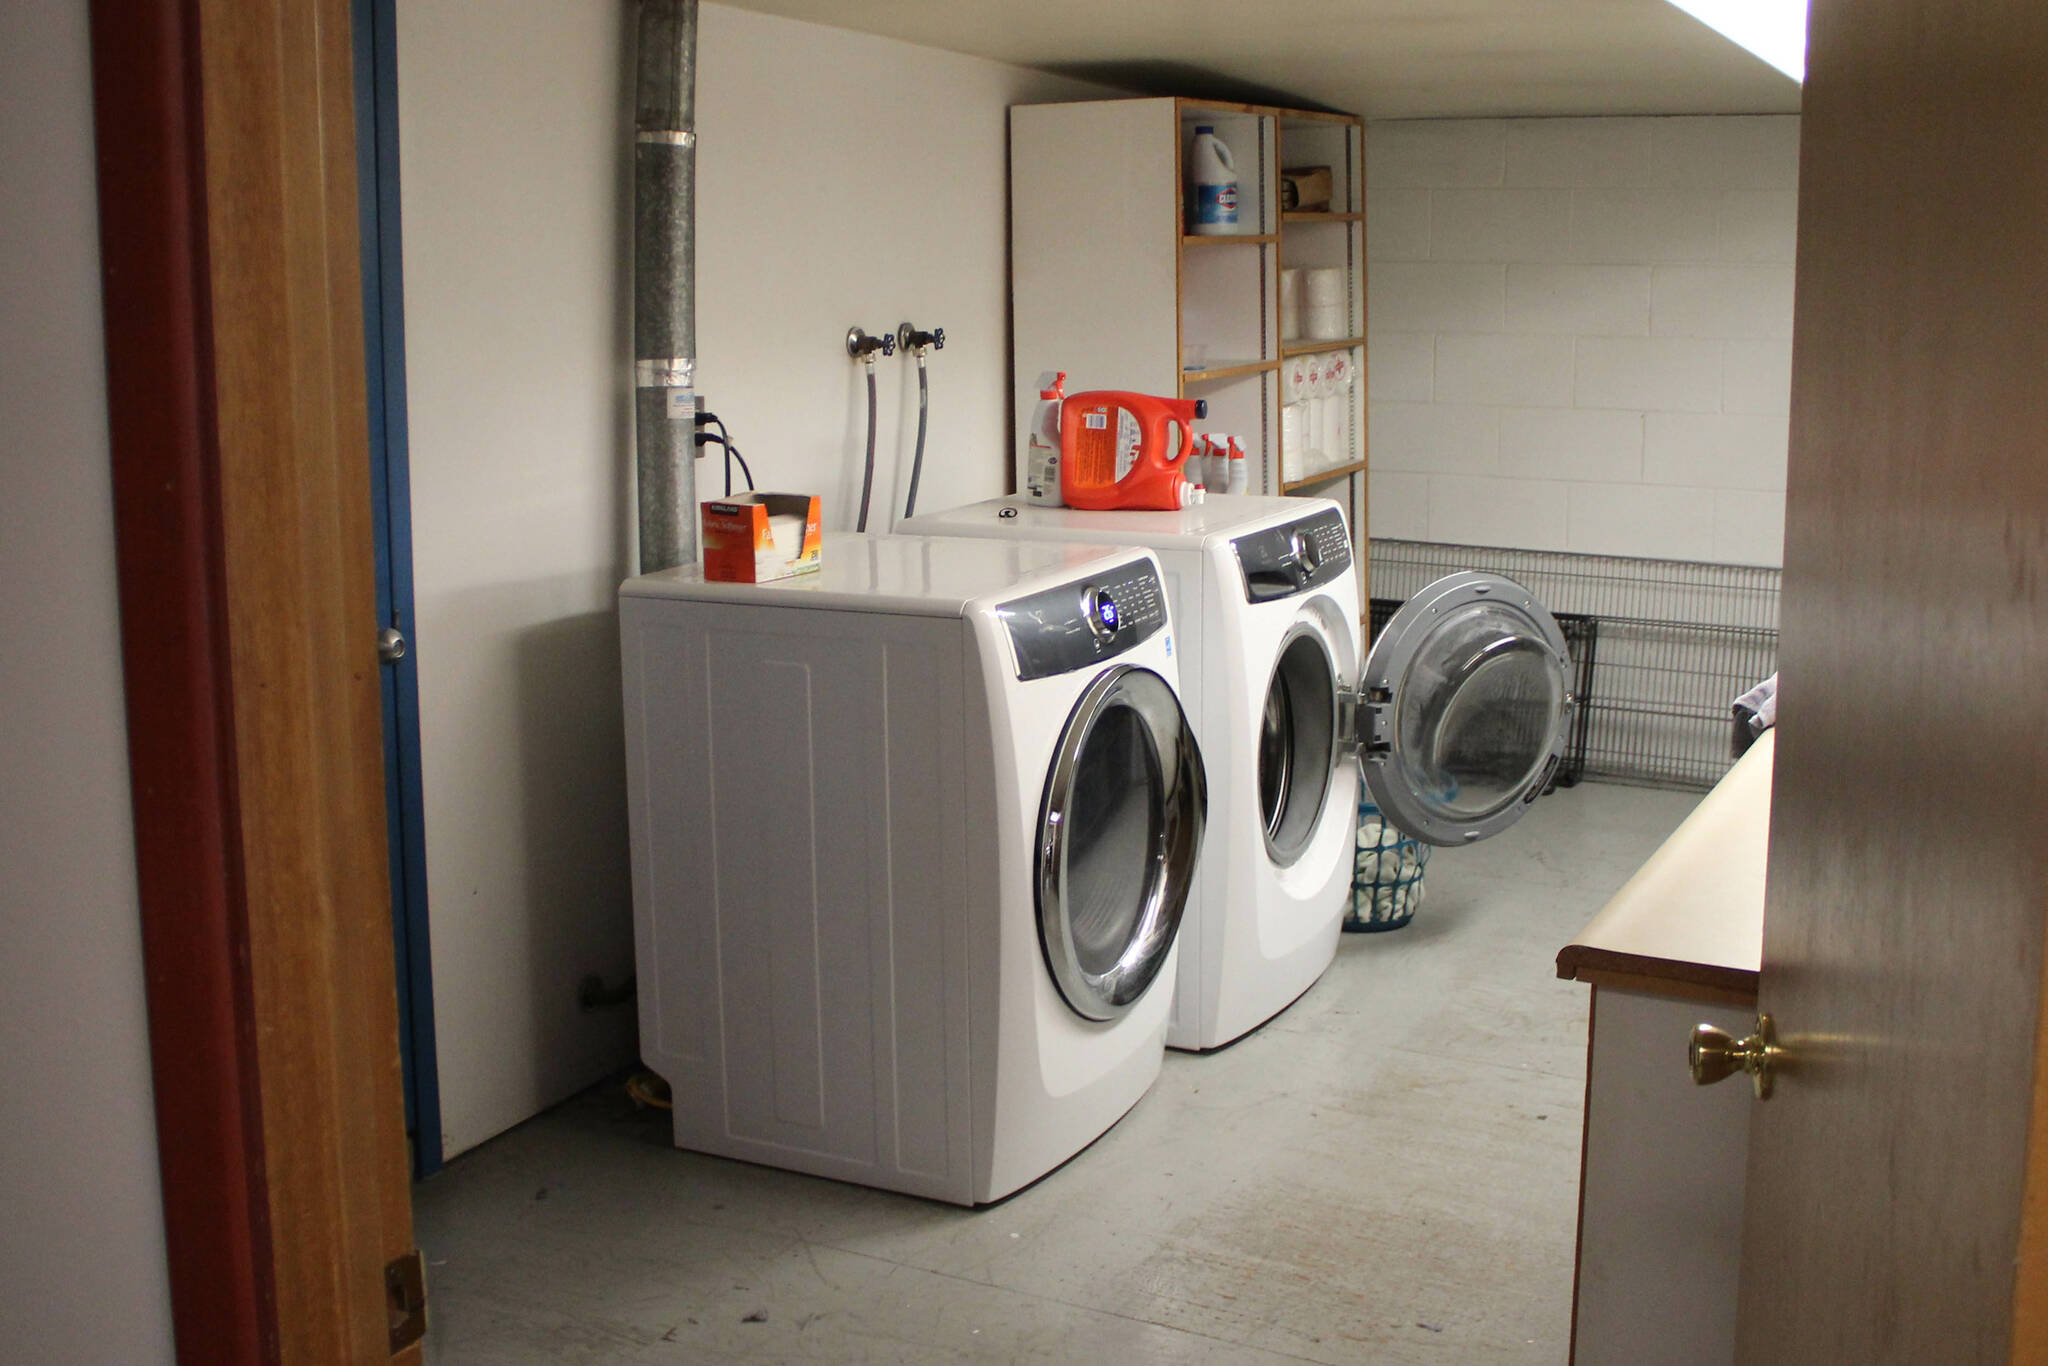 One washer and one dryer sit inside a utility room at Central Emergency Services’ Station 1 on Tuesday, July 26, 2022, in Soldotna, Alaska. The two machines serve all of Station 1’s personnel. (Ashlyn O’Hara/Peninsula Clarion)